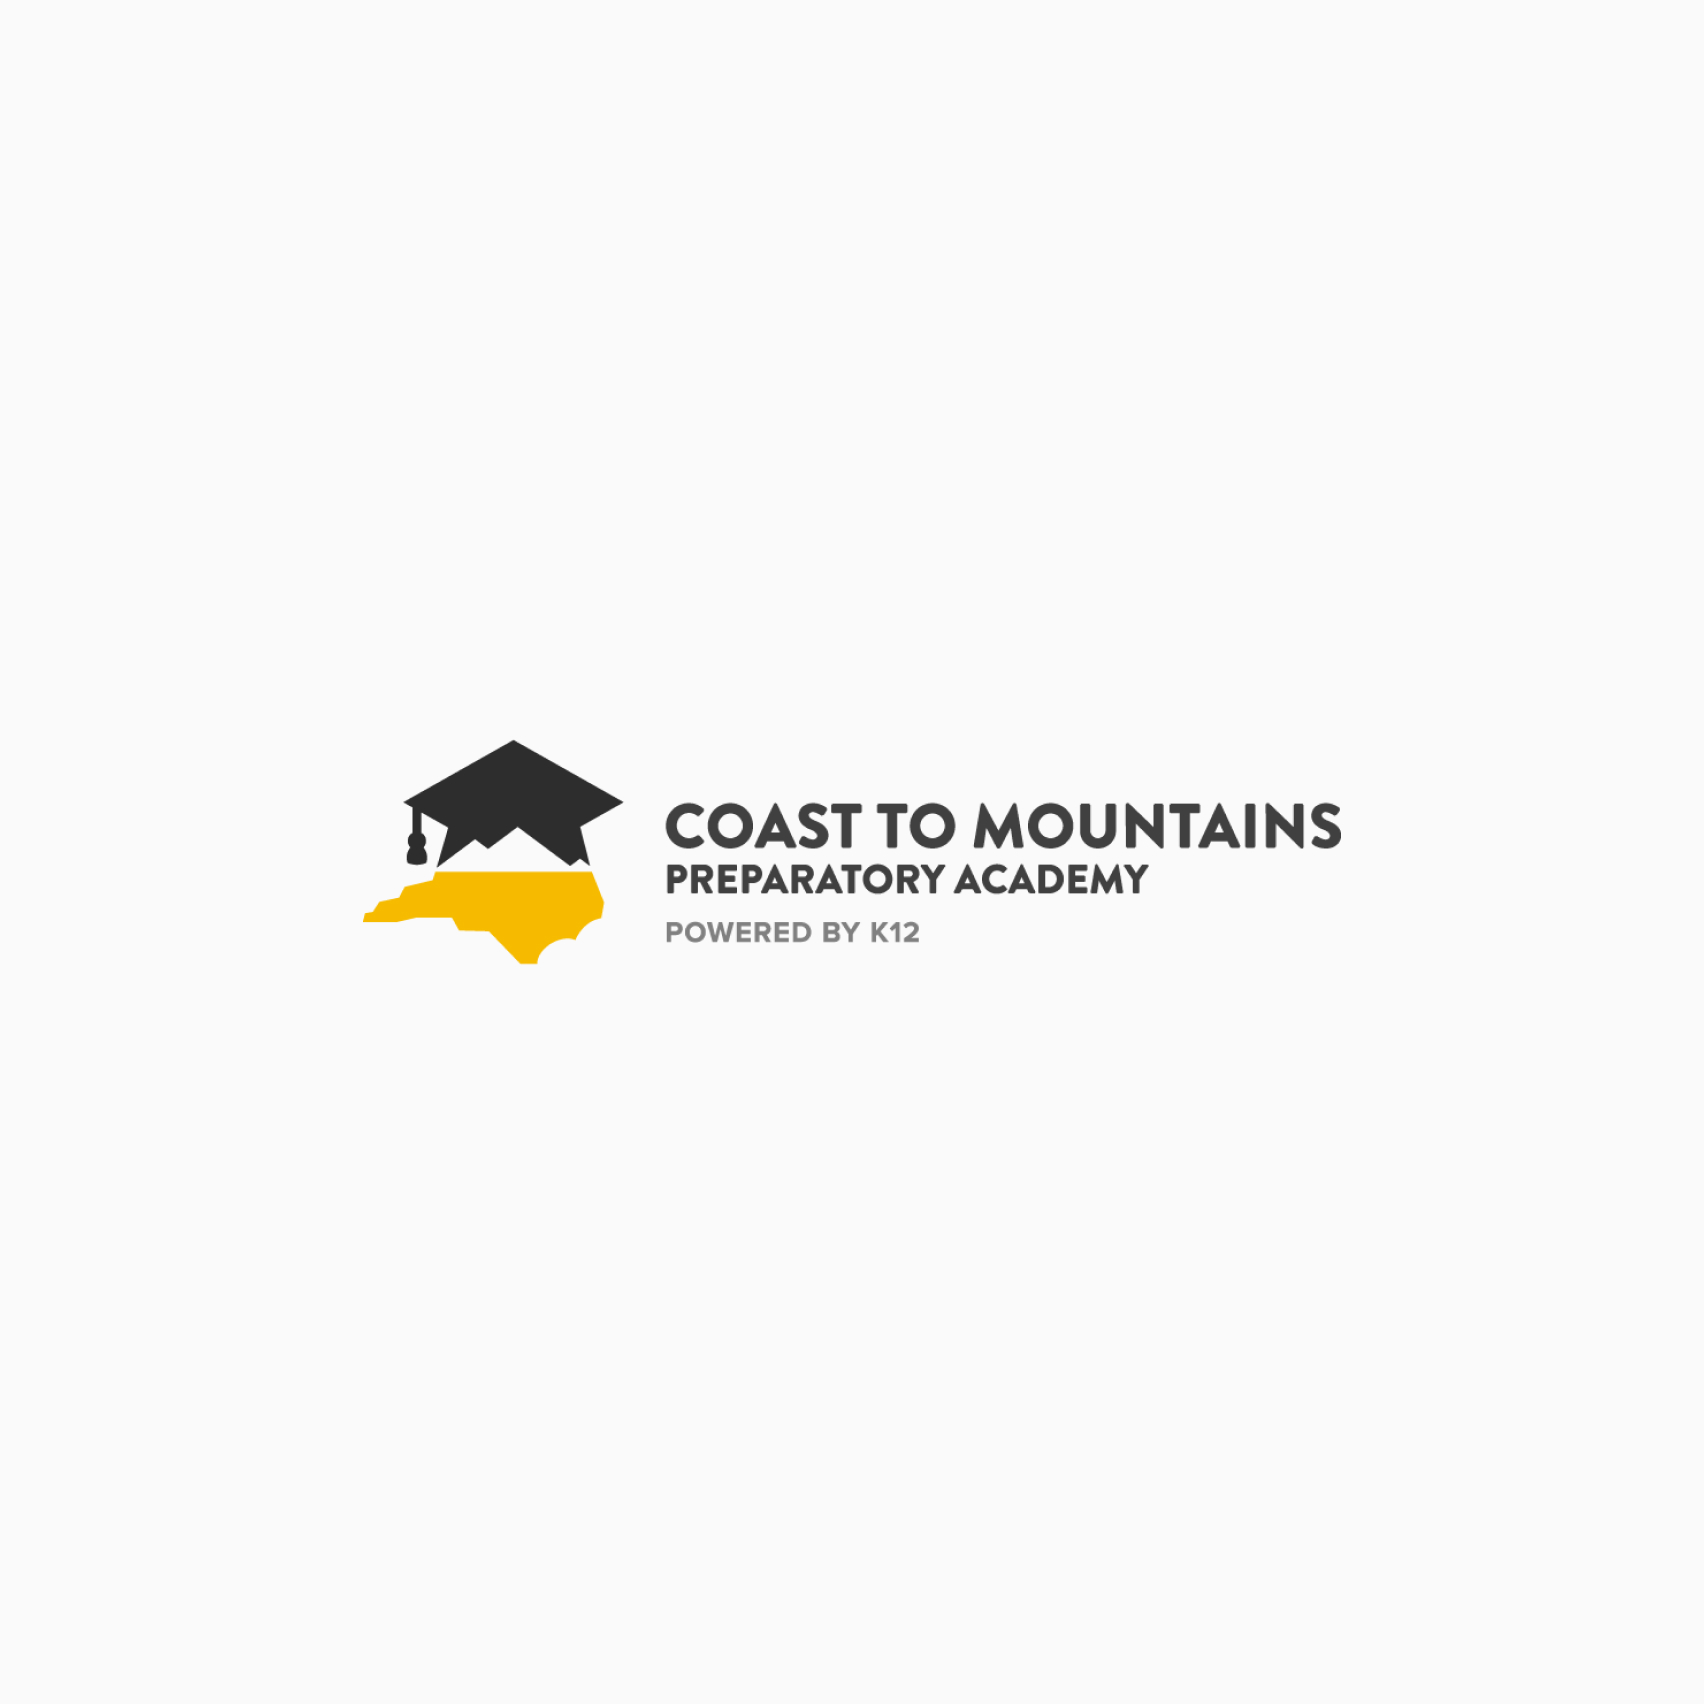 Tuition and Costs image 21 (name Coast to Mountains)